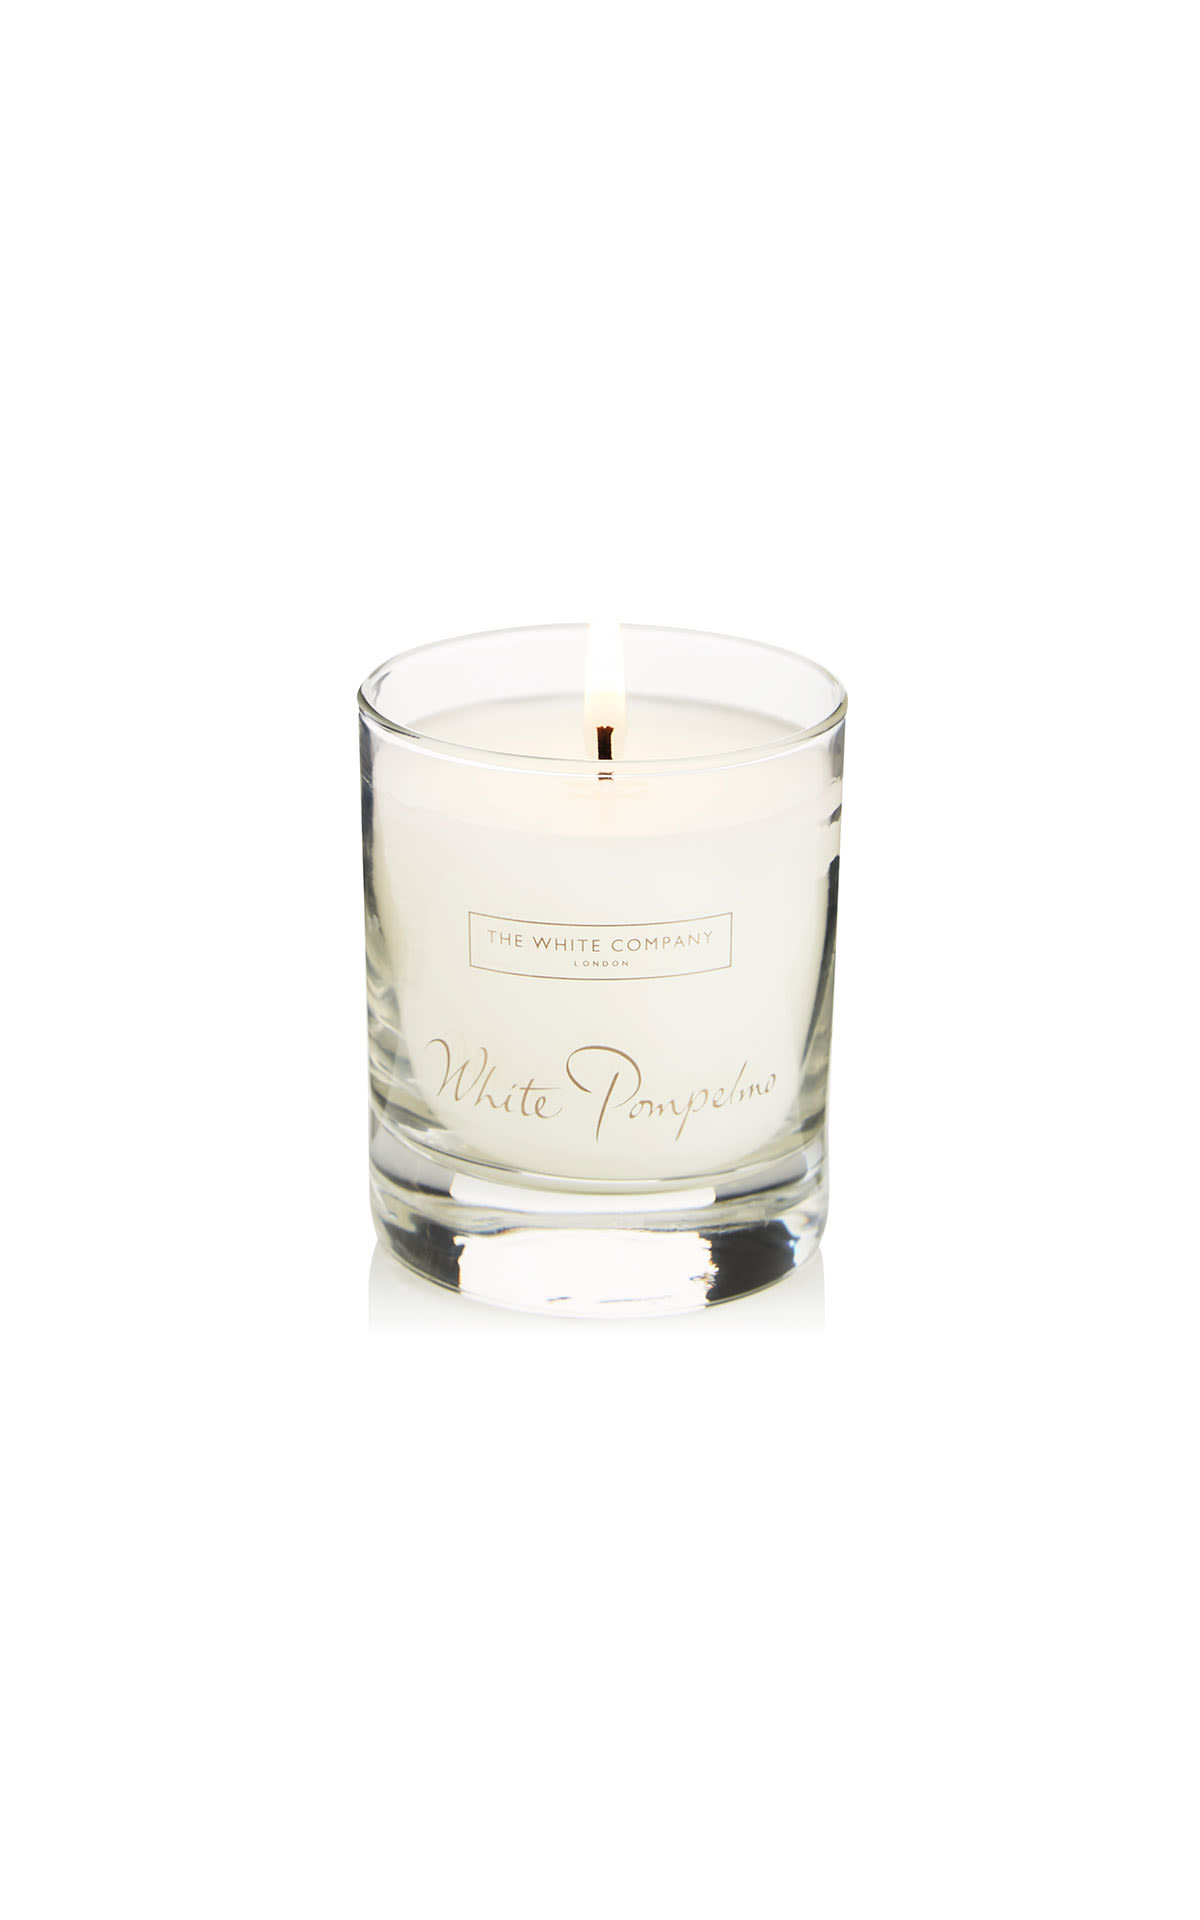 The White Company White pompelmo signature candle from Bicester Village